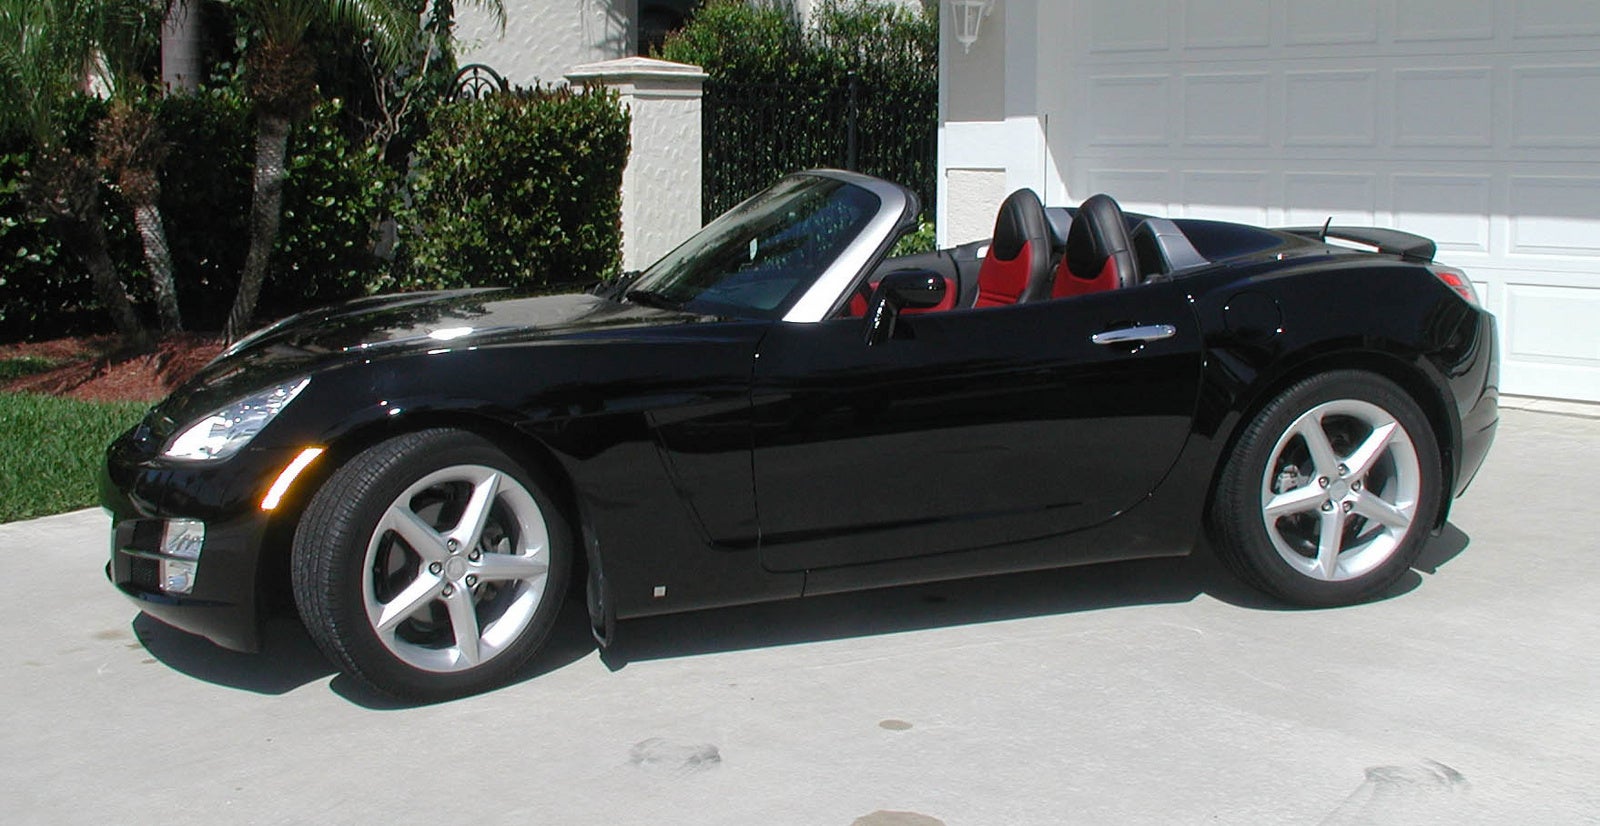 Saturn Sky Review Research New Used Saturn Sky Models | Autos Post